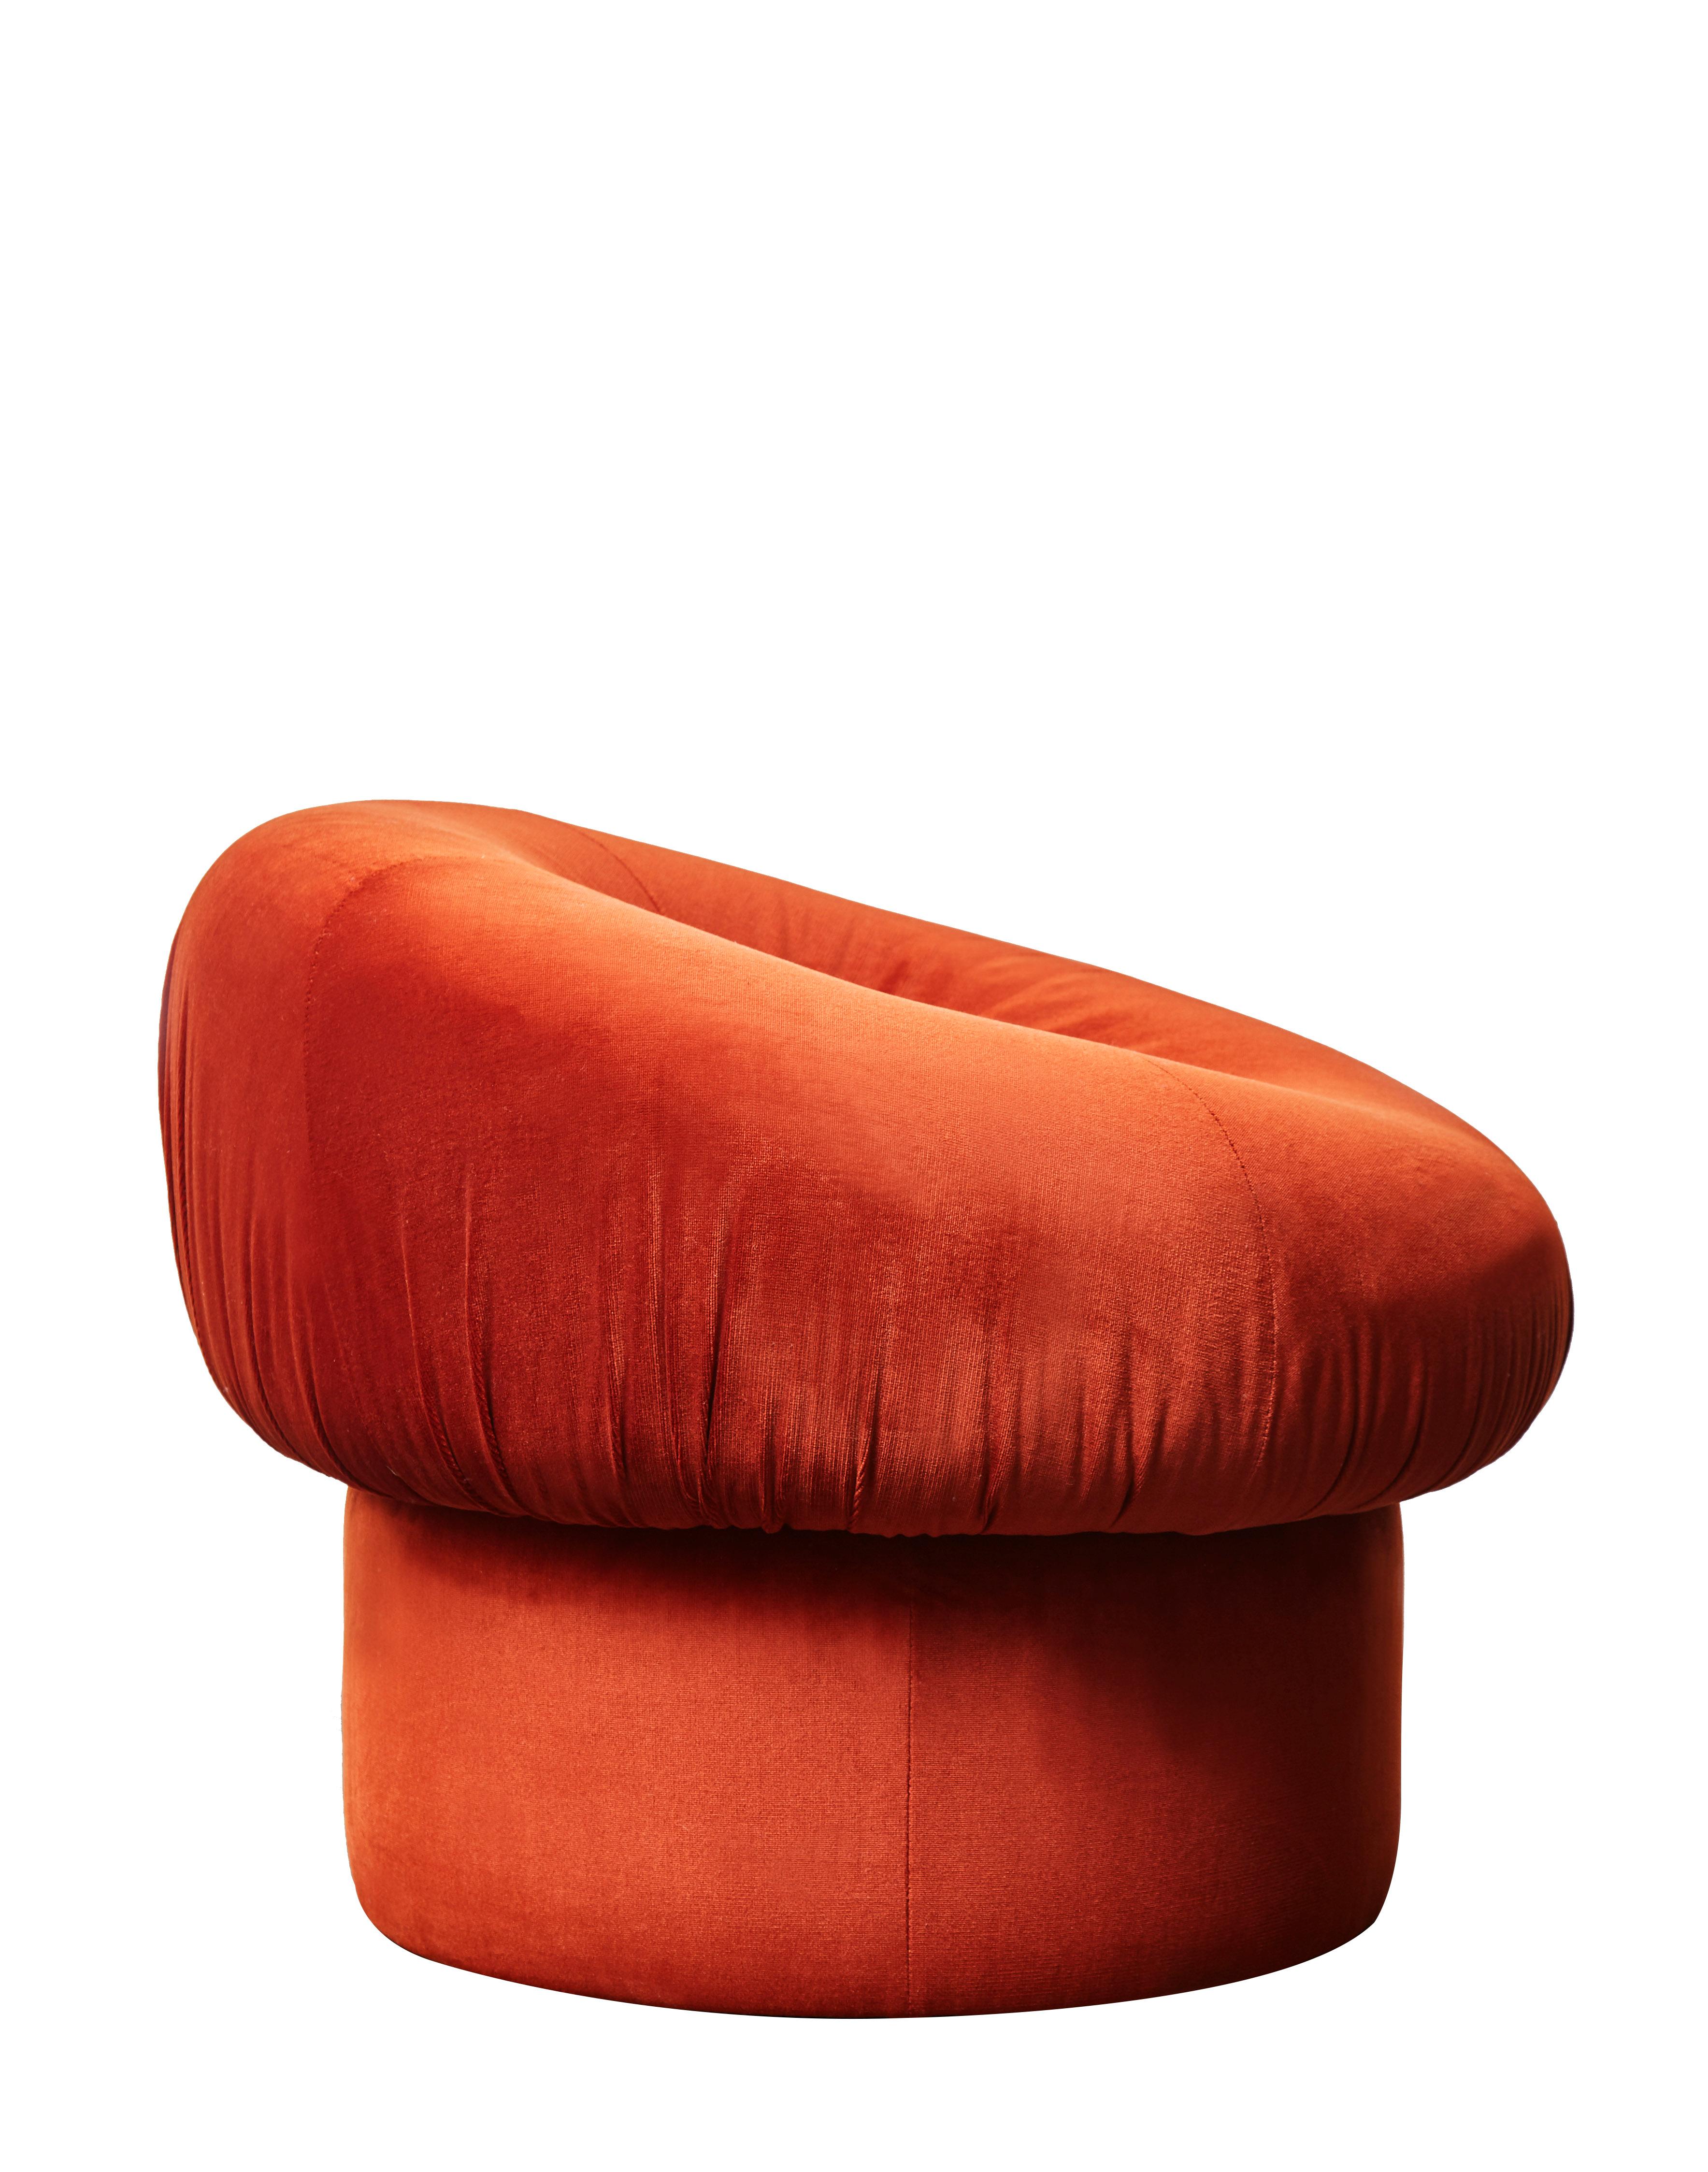 This pair of vintage armchairs/poufs has been reupholstered with terracotta velvet fabric.